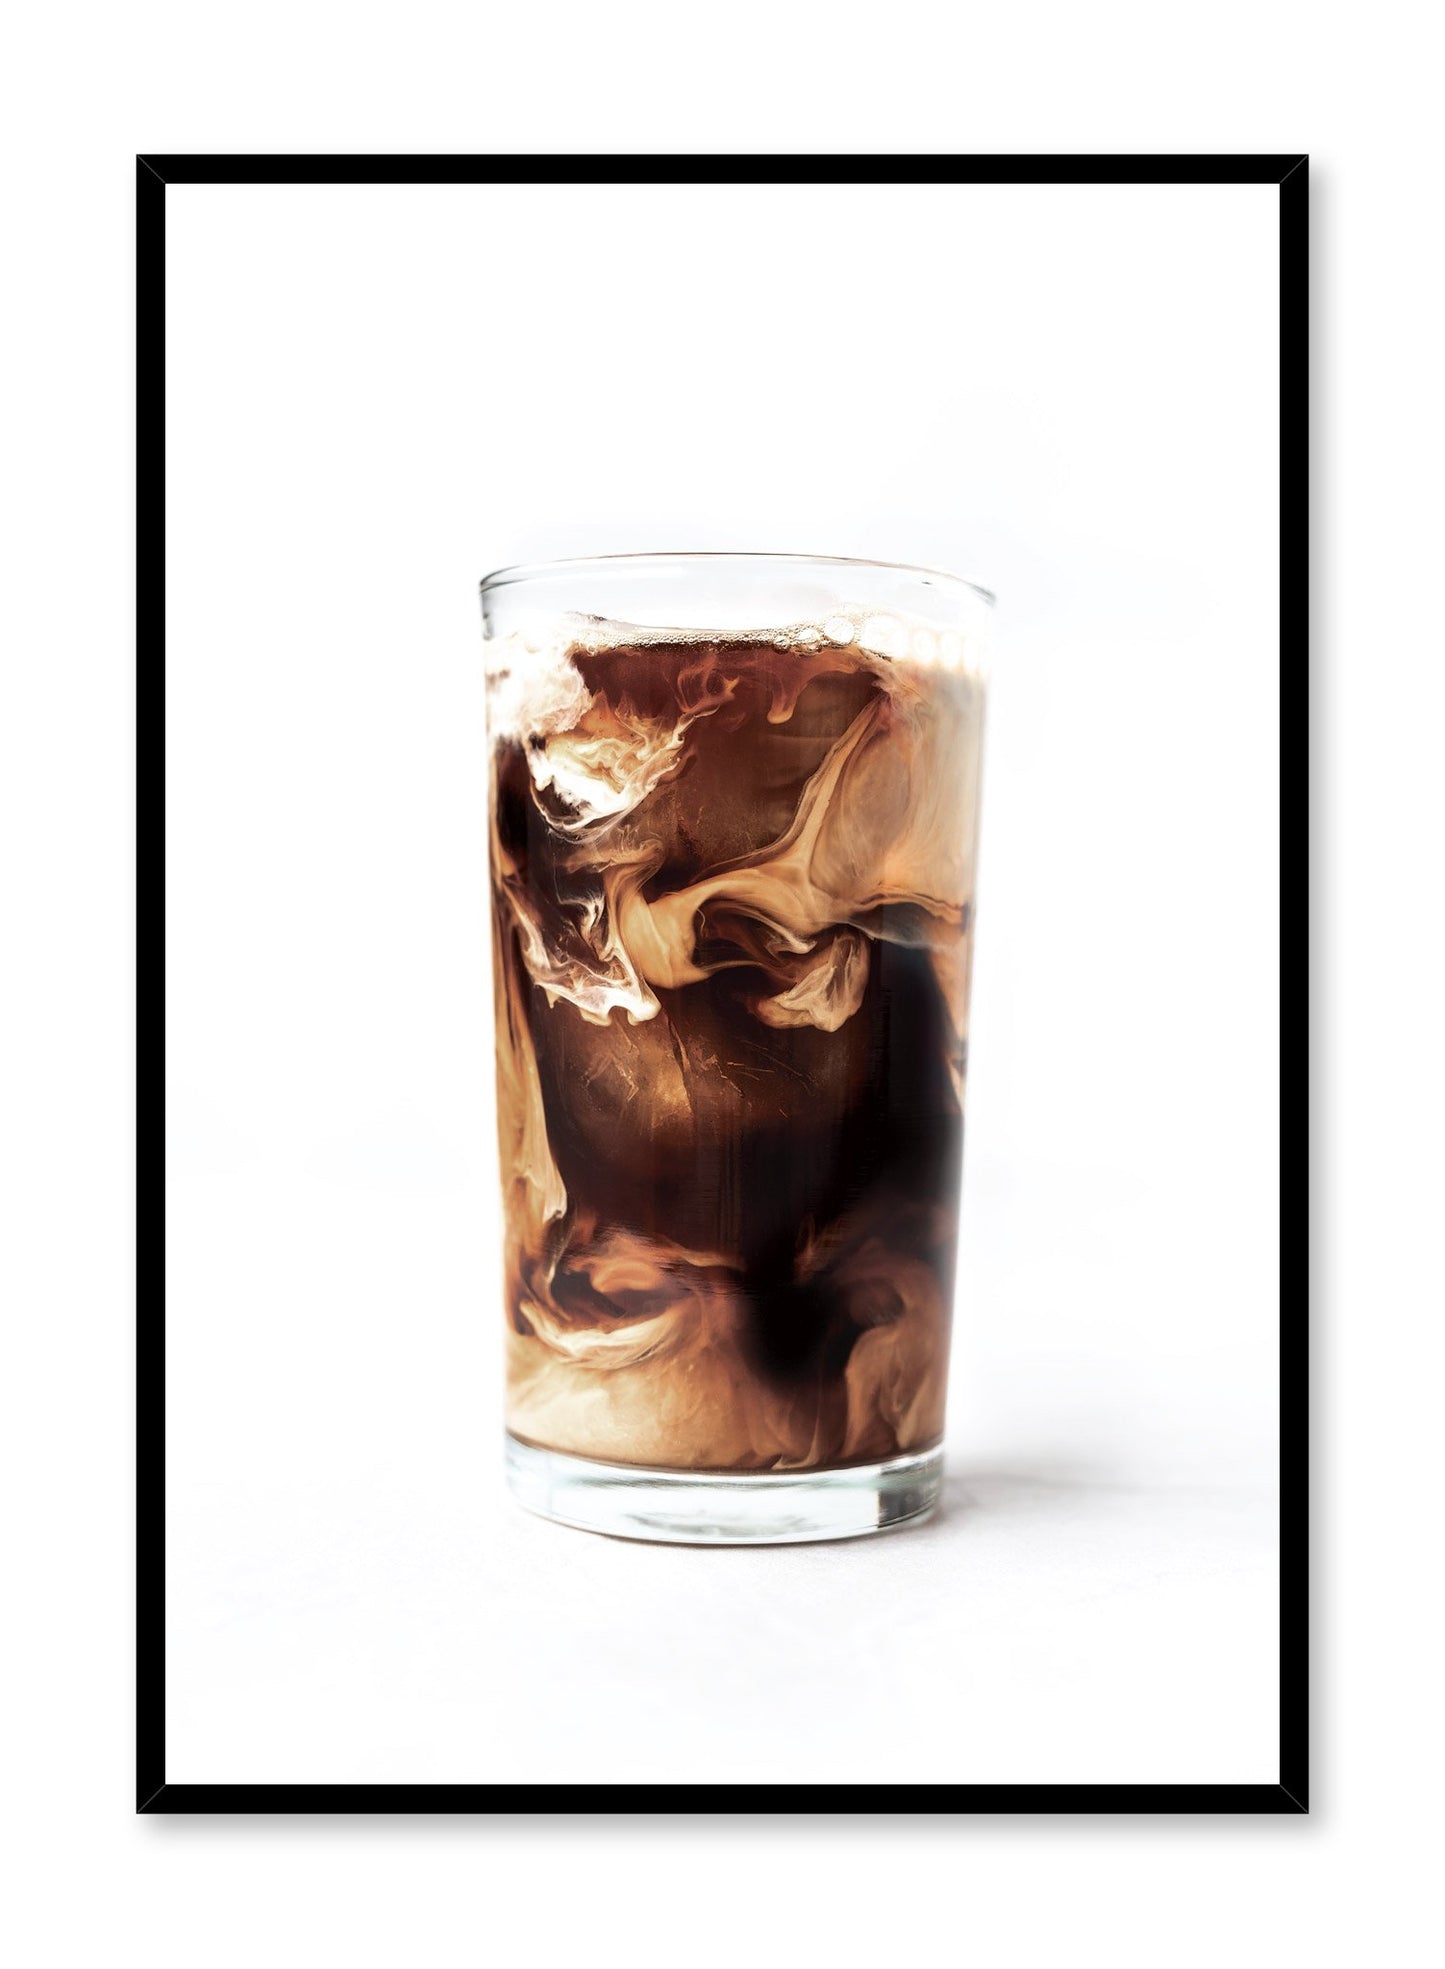 Minimalist poster by Opposite Wall with Cold Brew coffee photography